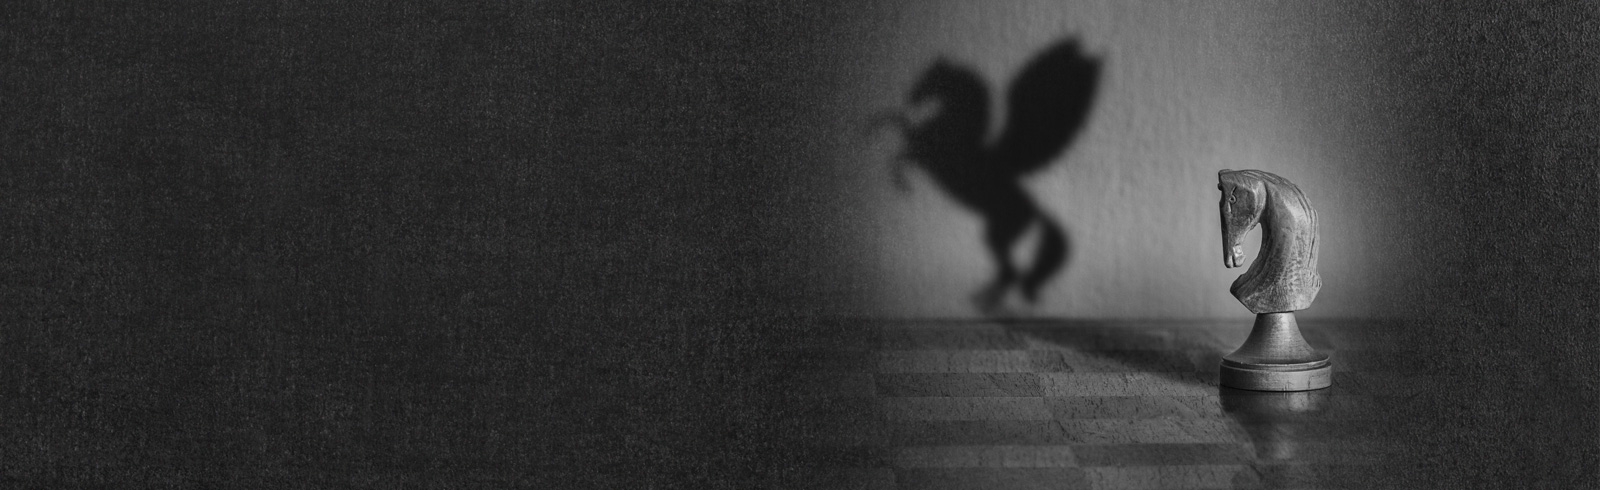 Shadow of a Knight on the chessboard transforming into a flying horse